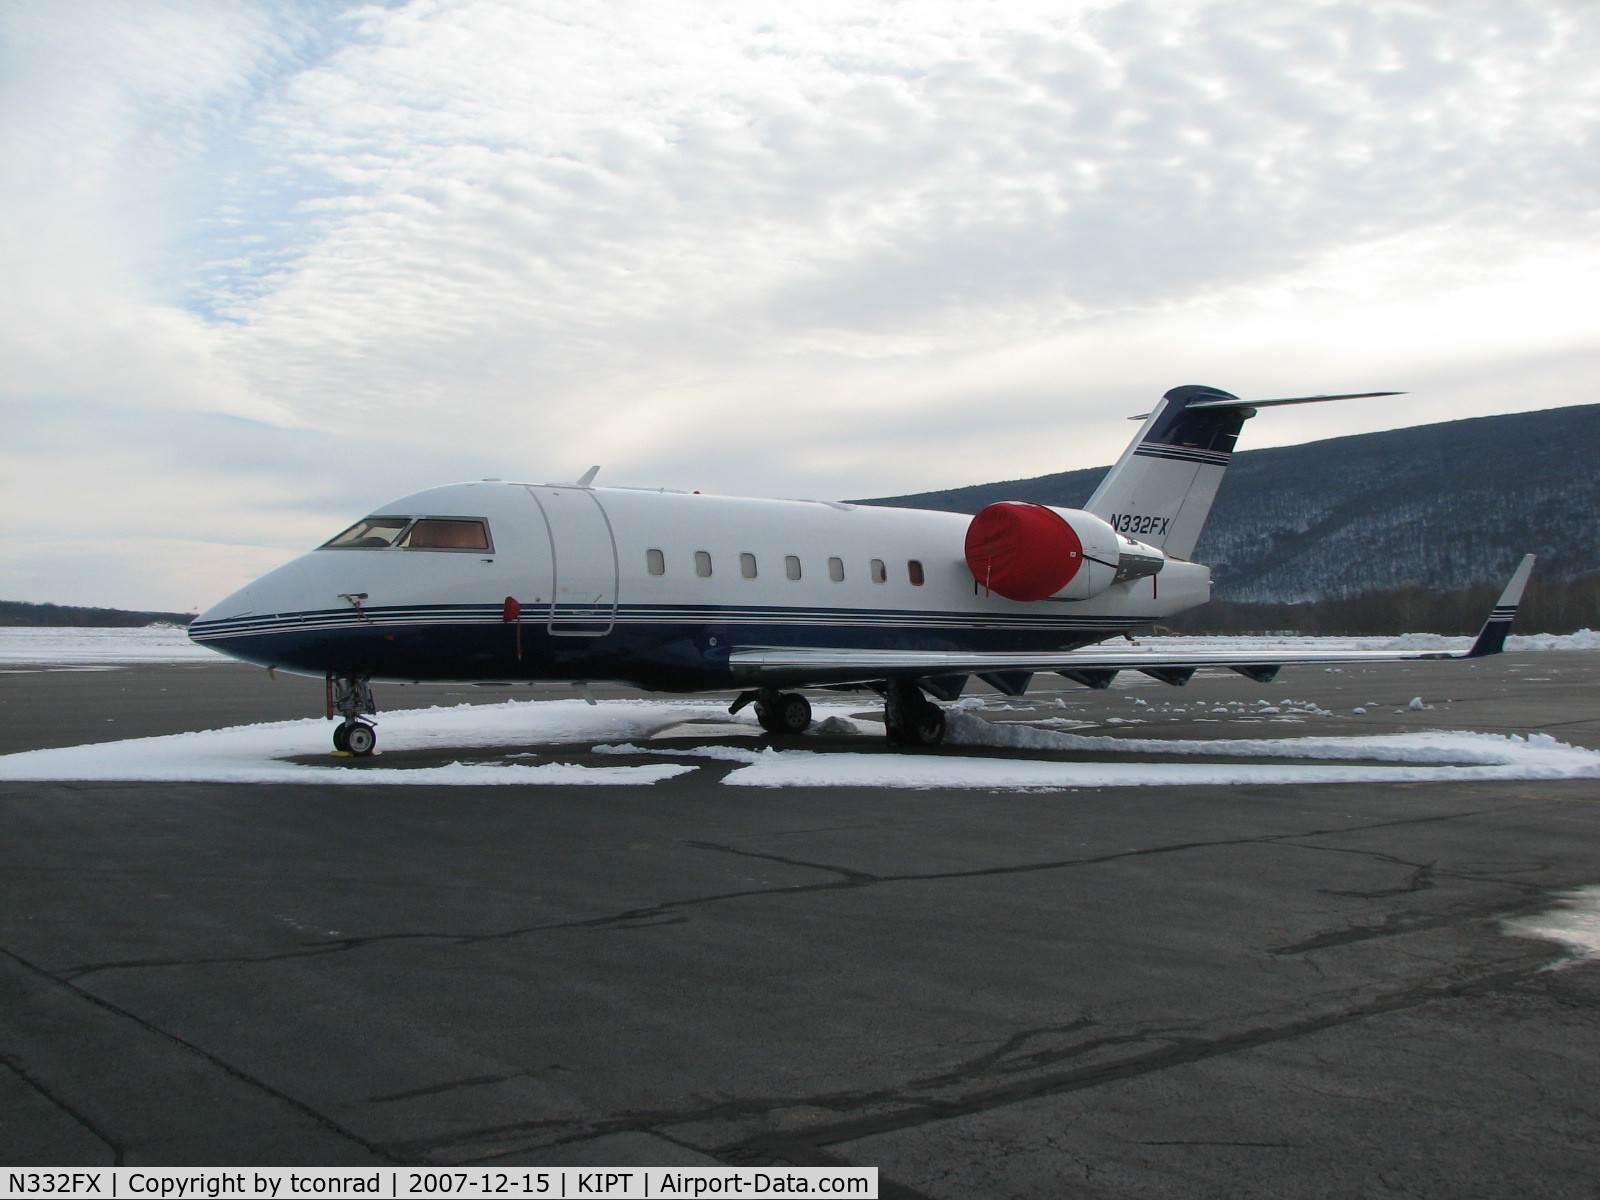 N332FX, 2002 Bombardier Challenger 604 (CL-600-2B16) C/N 5543, at Williamsport